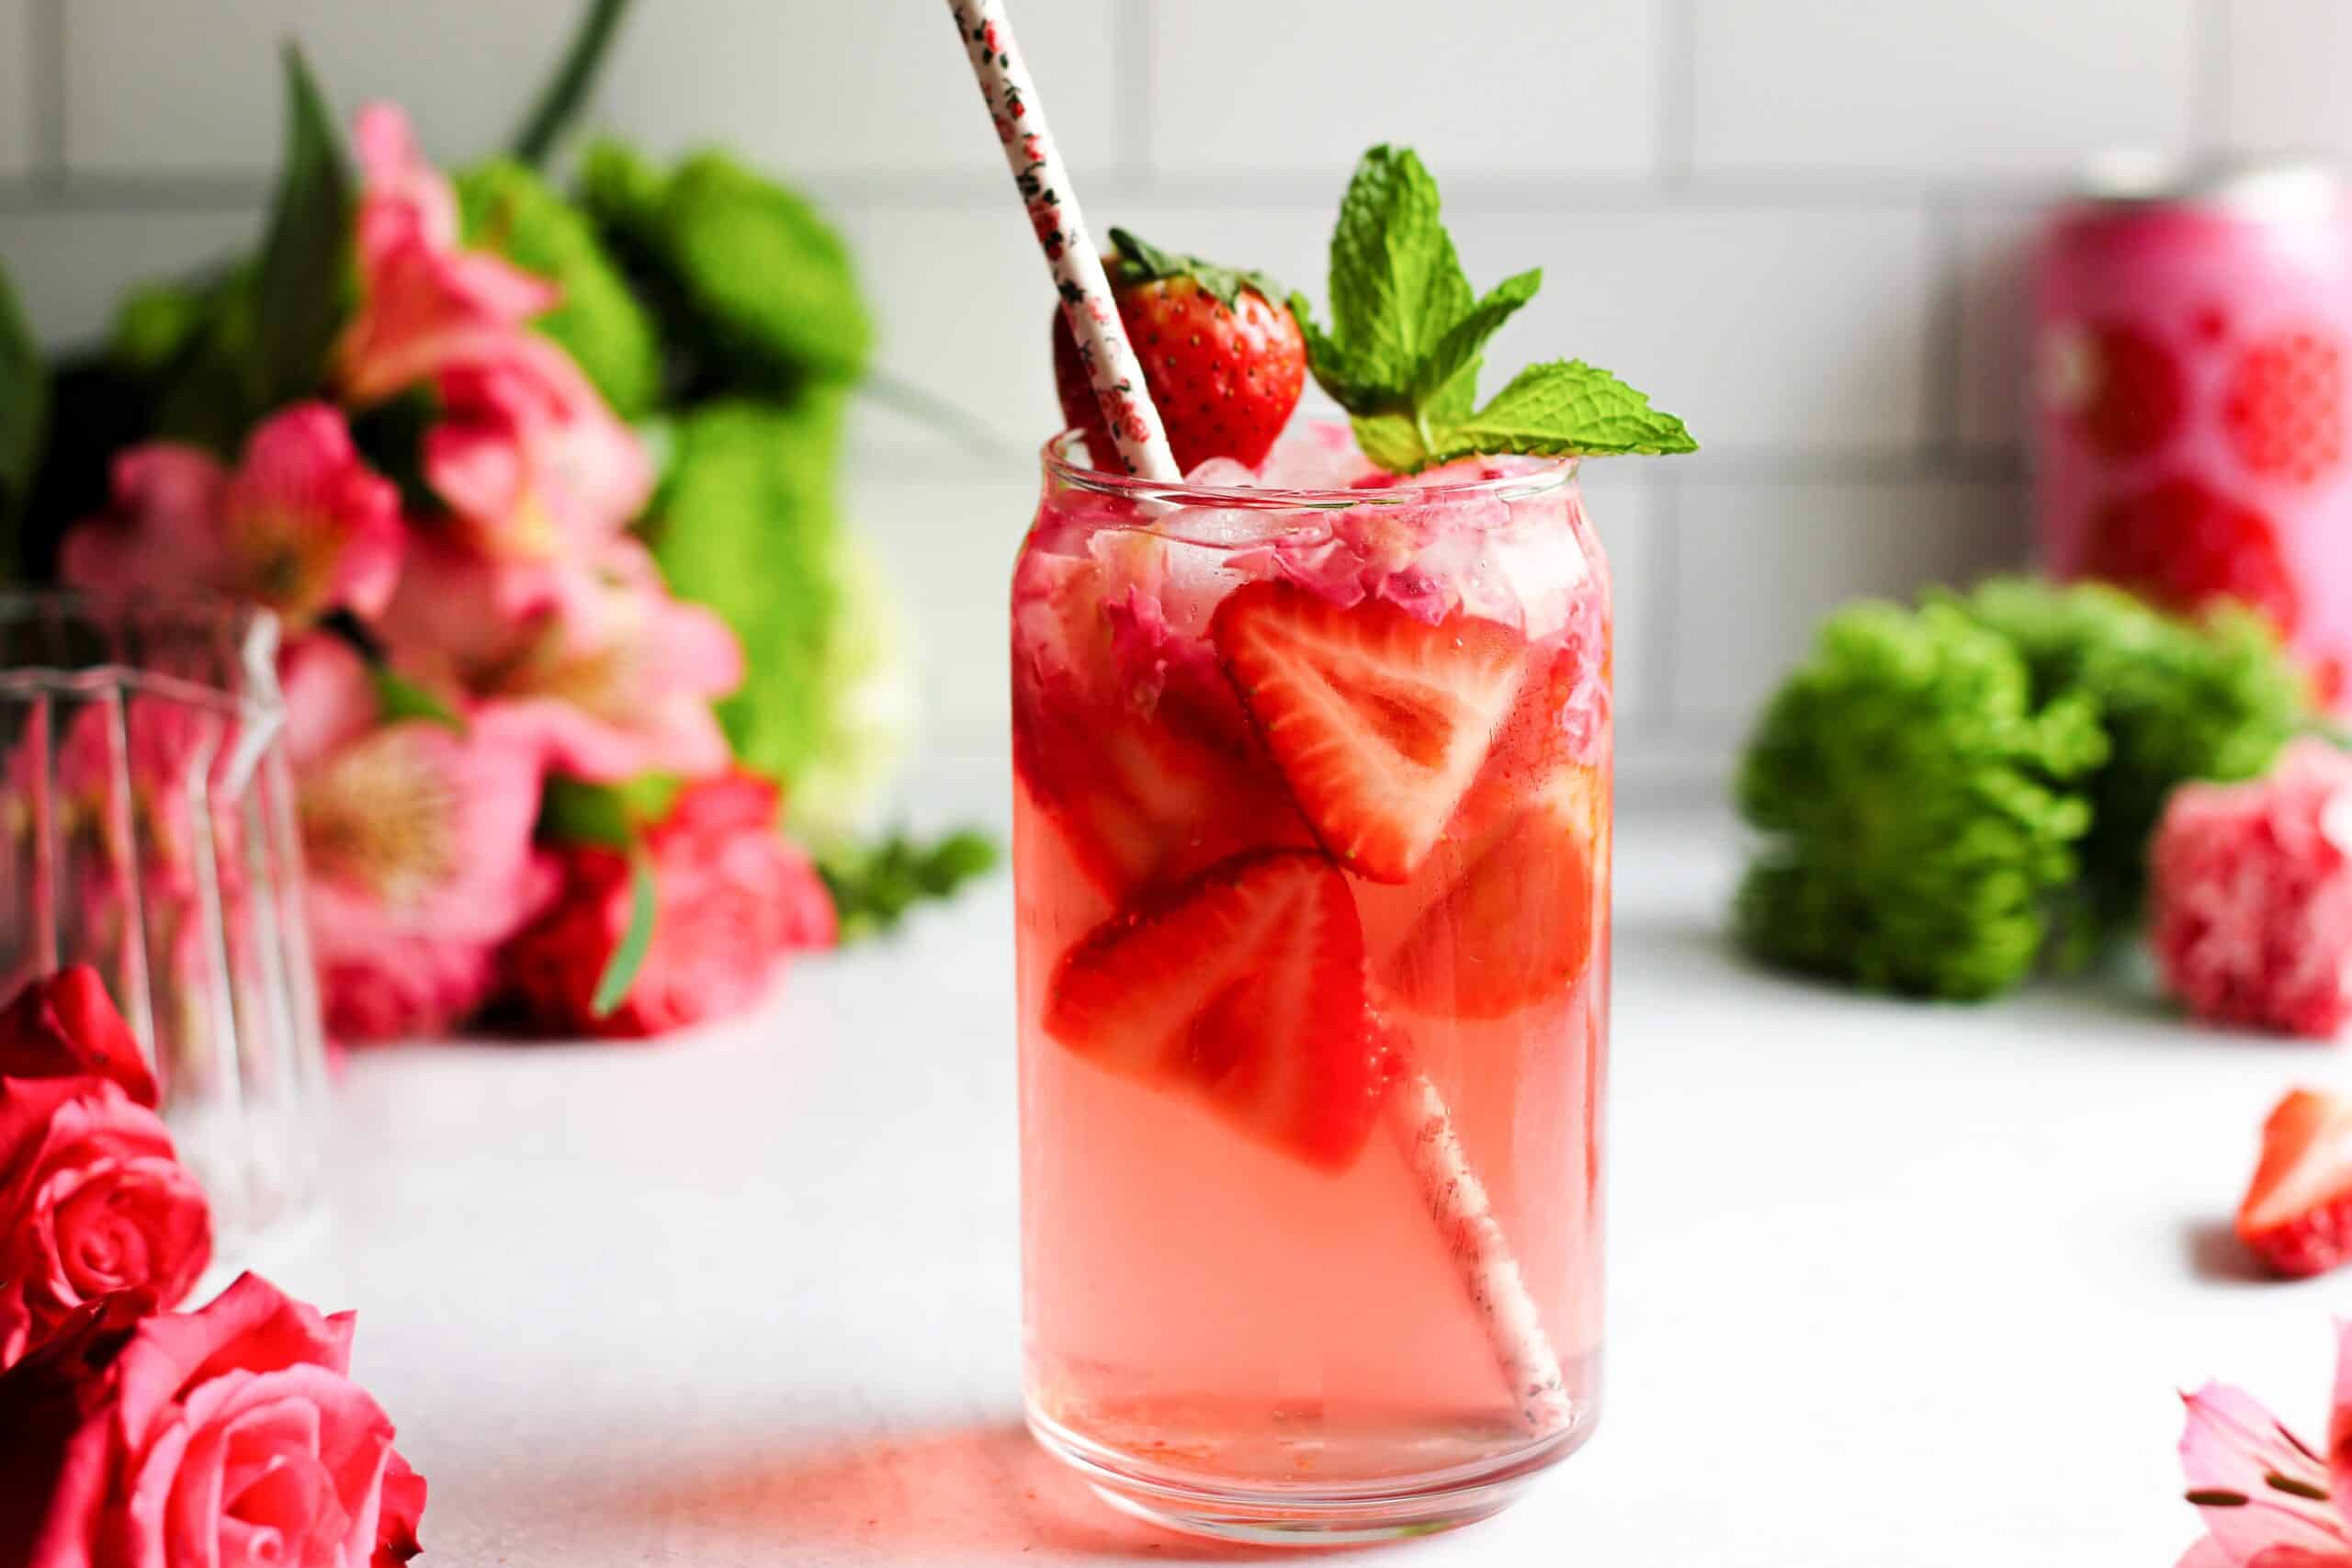 rose petal and berry mocktail